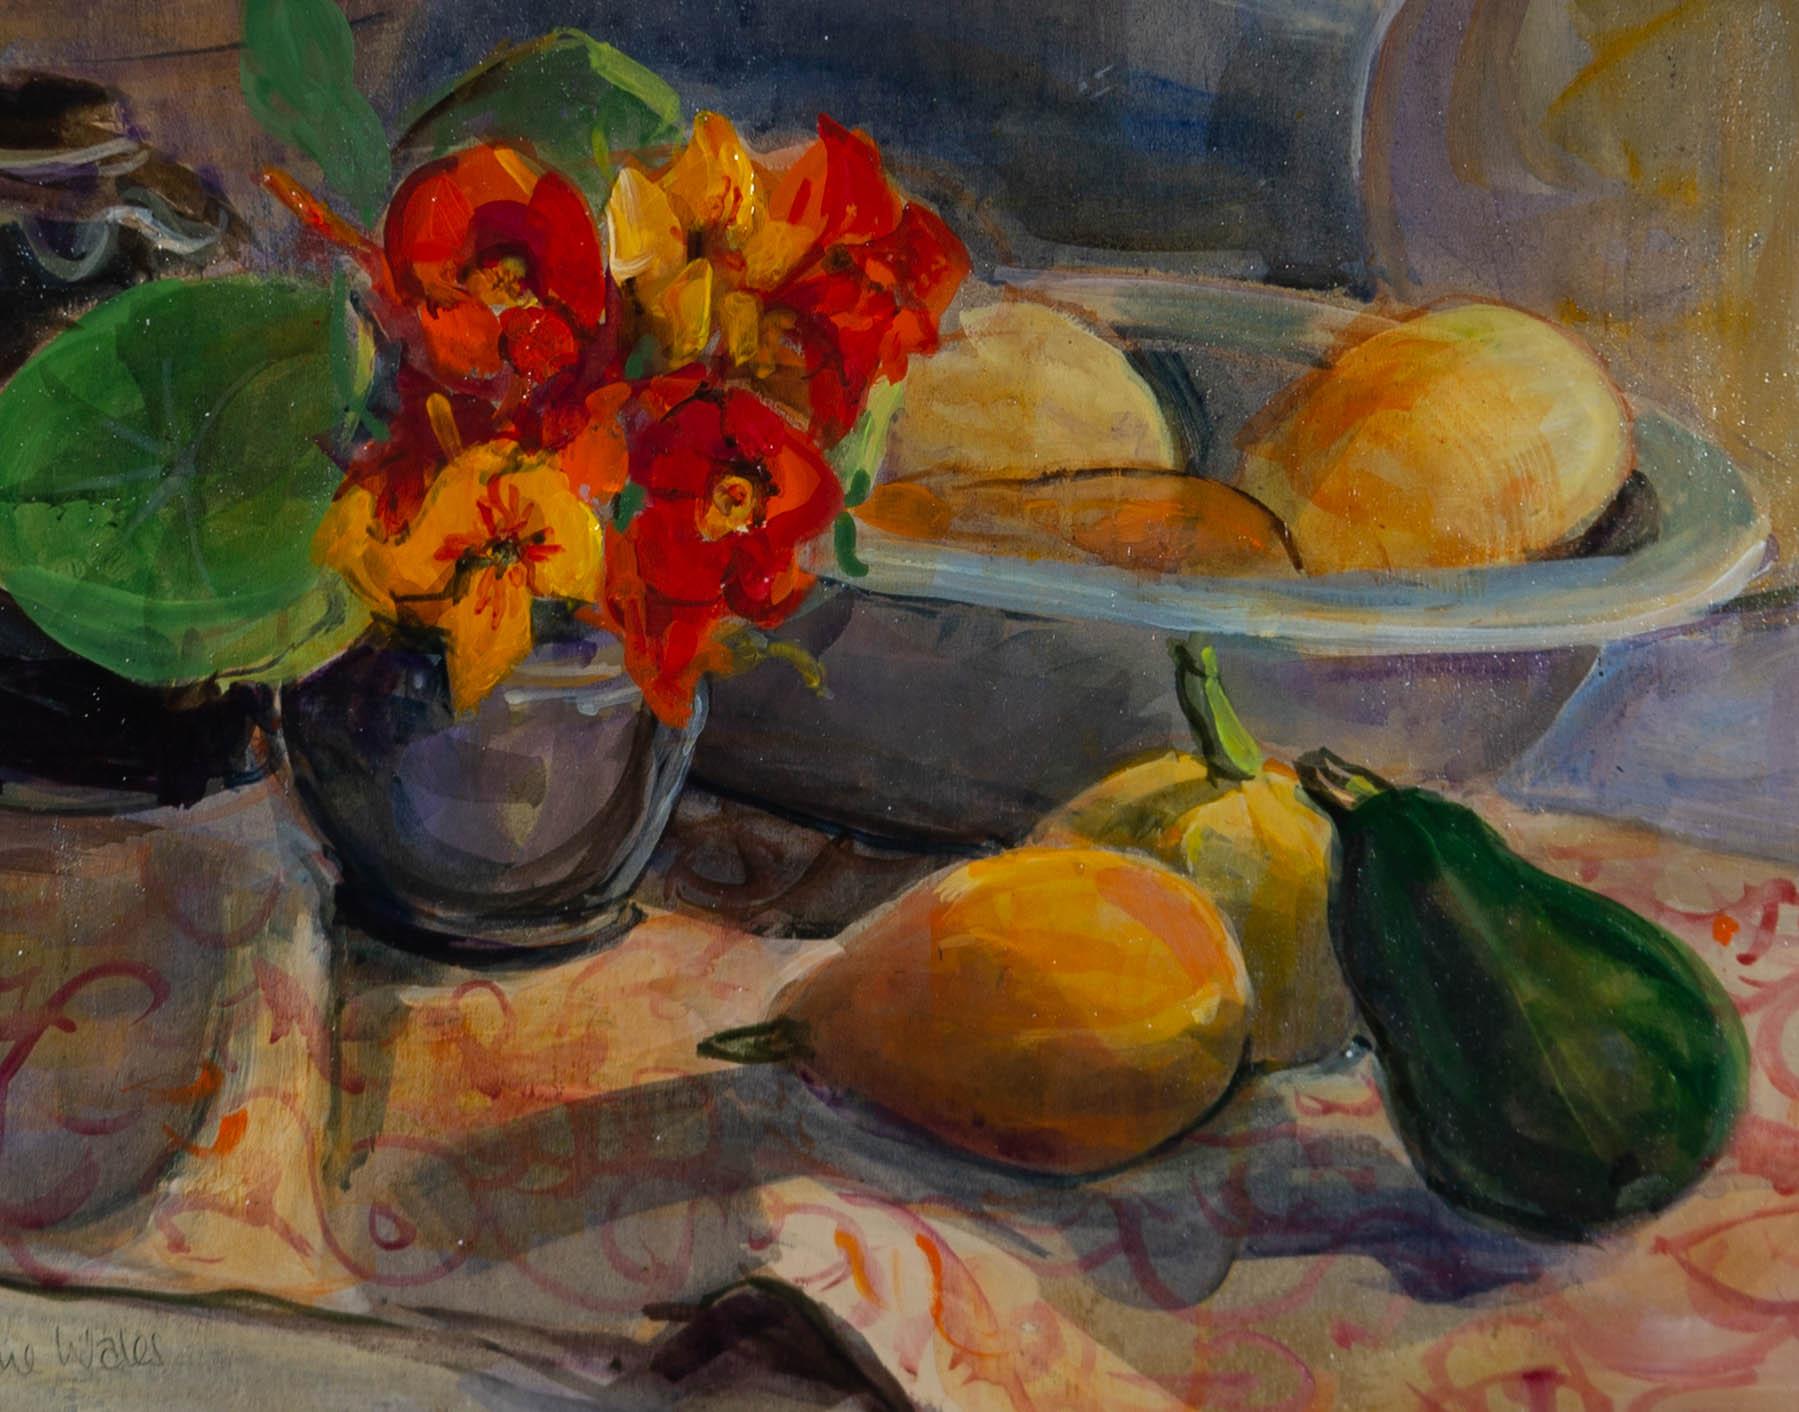 An early Autumnal still life, showing a vase of vibrant nasturtium flowers on a patterned tablecloth with a collection of miniature gourds. The artist has captured a lovely warm light that casts long shadows across the scene, as though its a Autumn